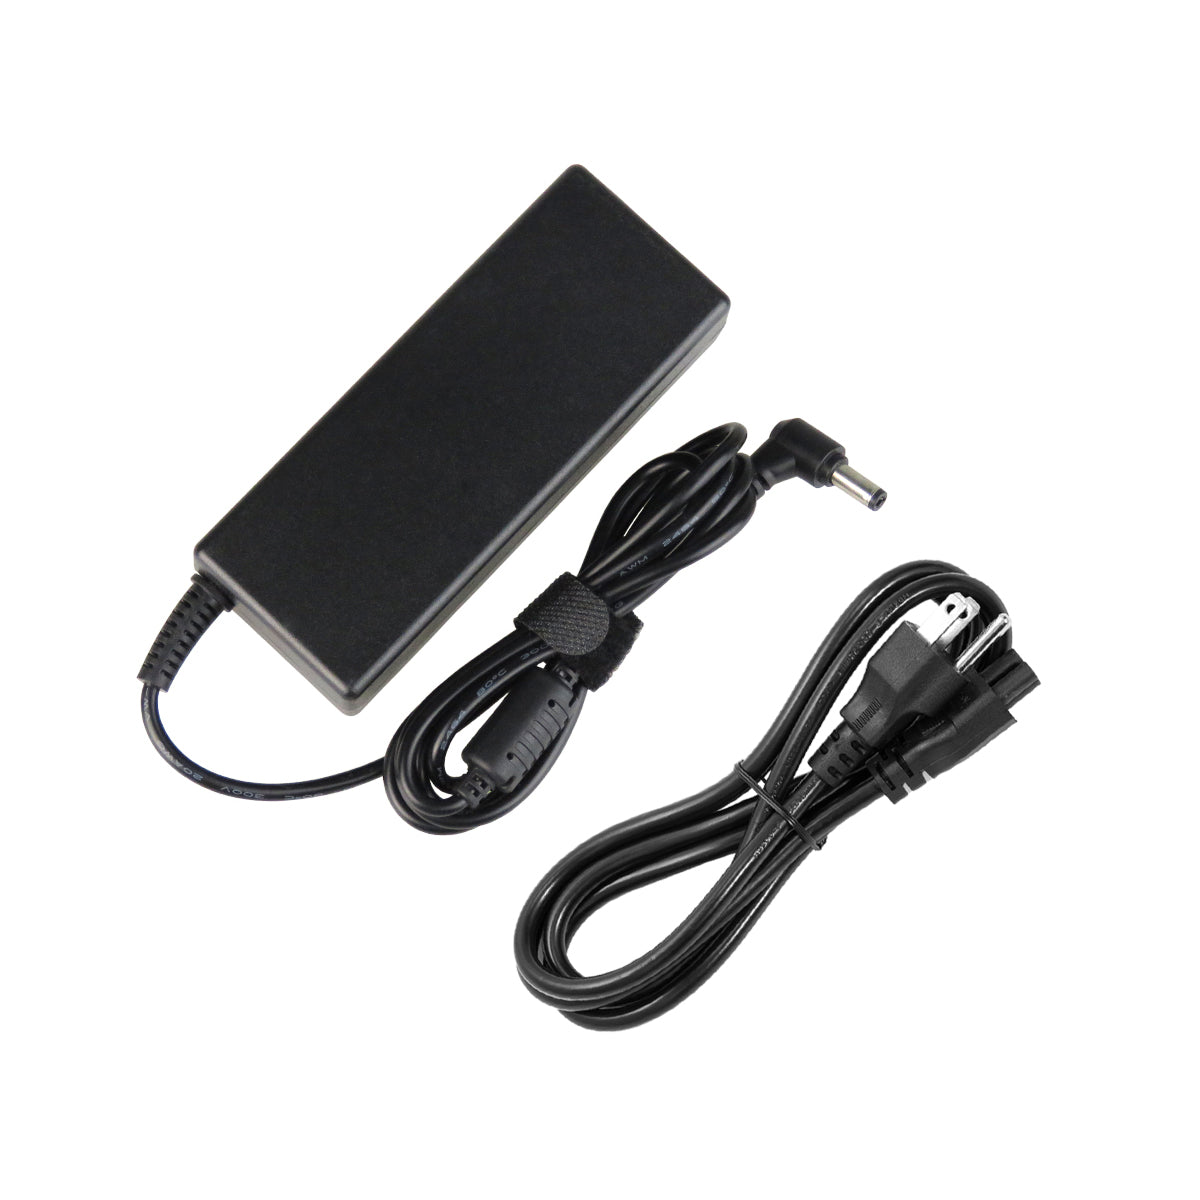 AC Adapter Charger for ASUS K54S Notebook.